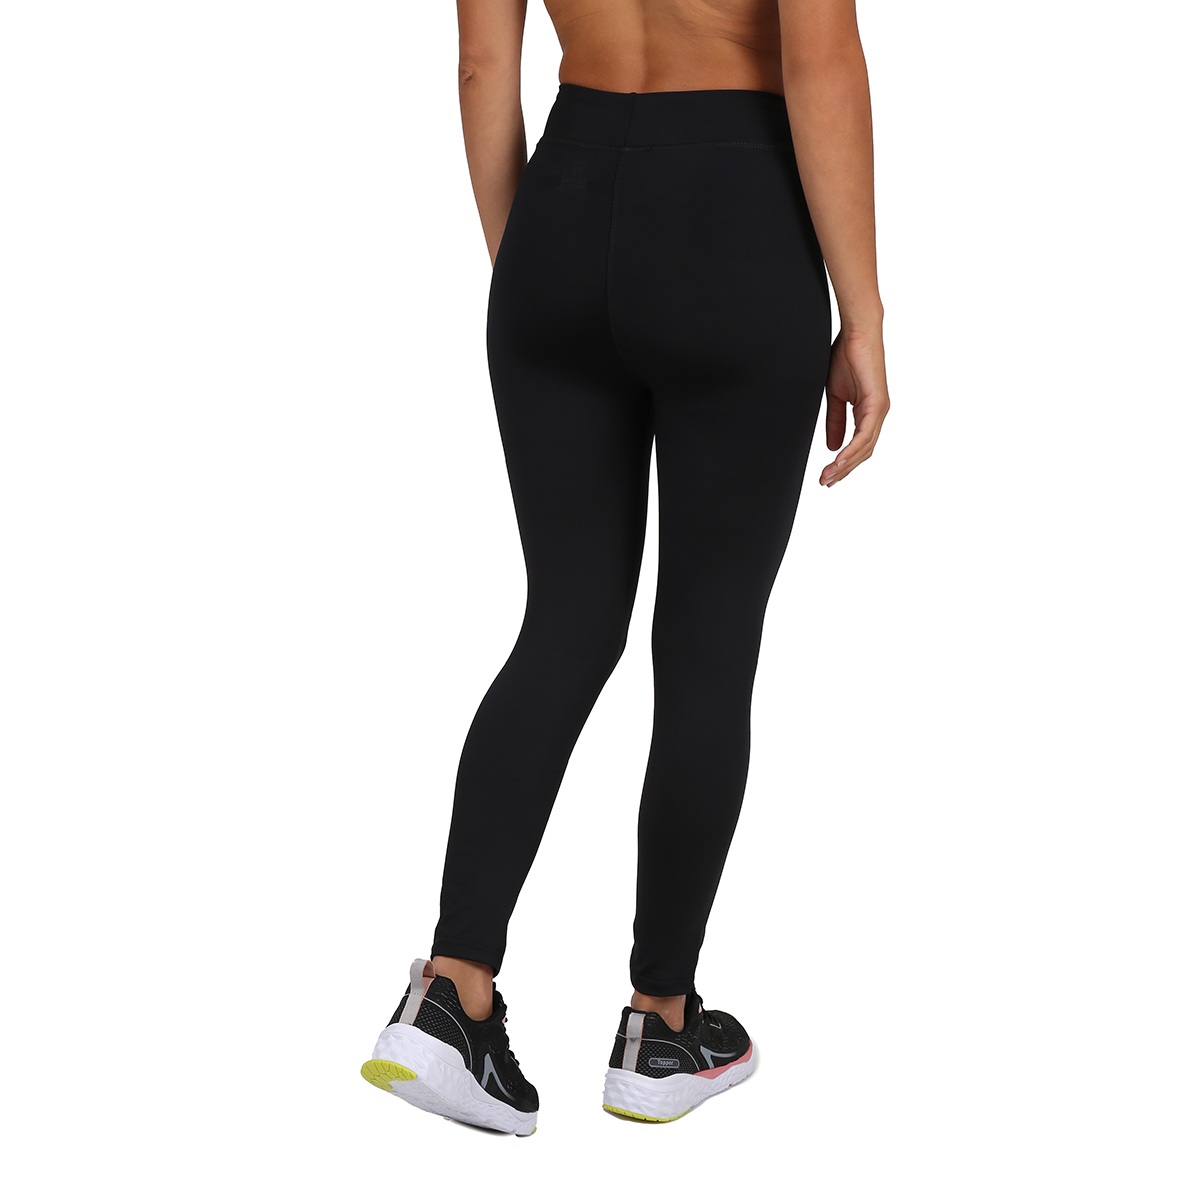 Calza Entrenamiento Topper 7-8 Mujer,  image number null